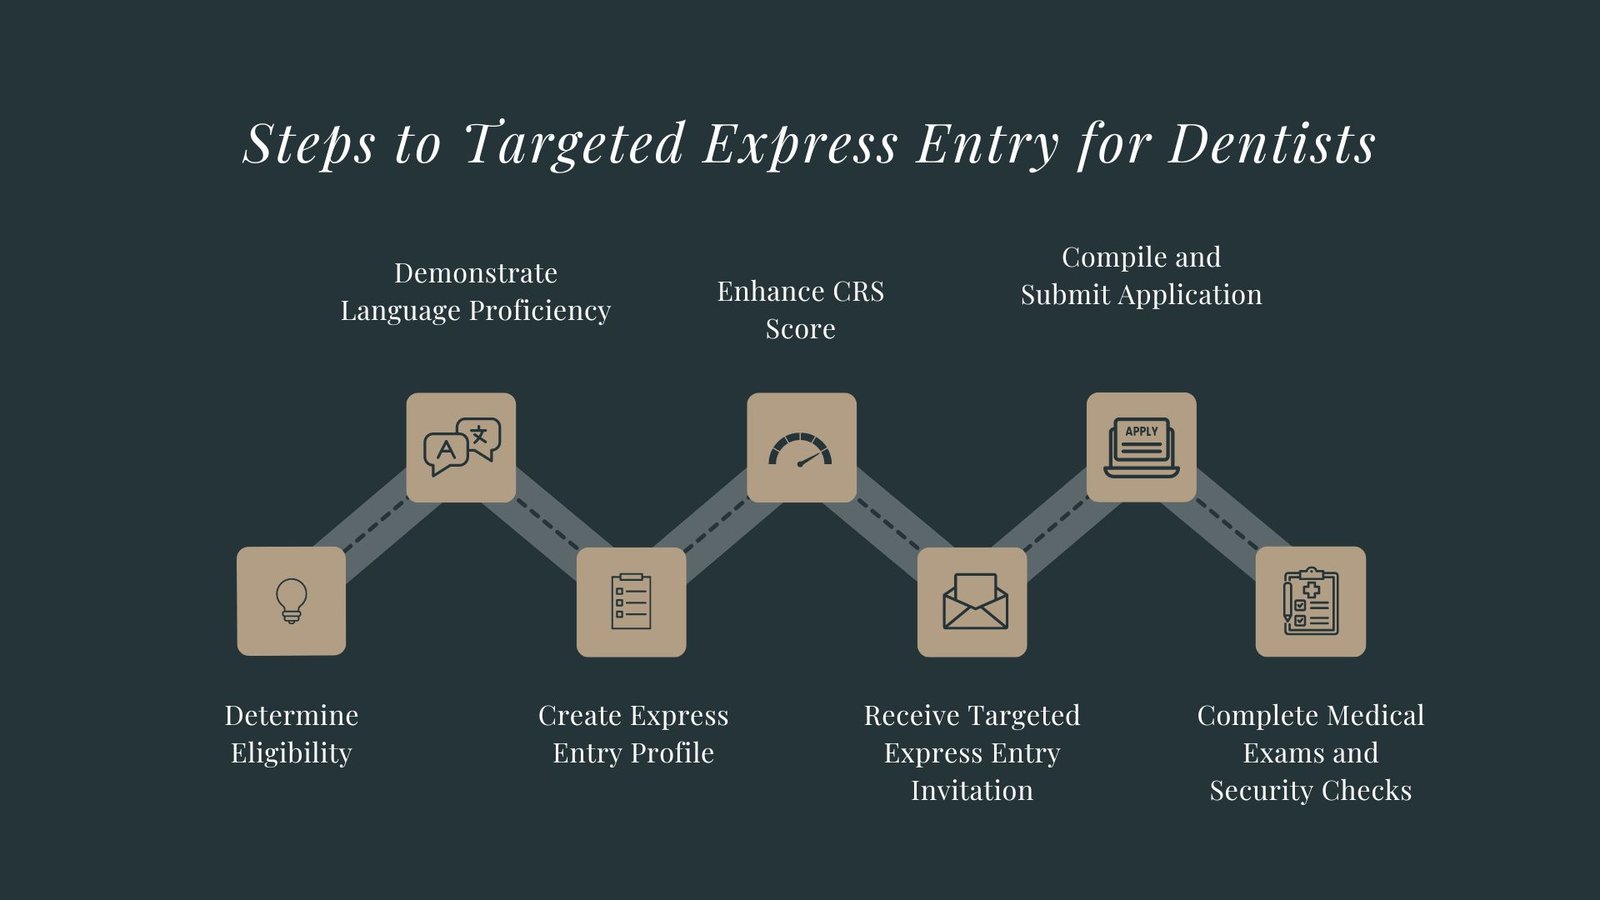 Cateogry-Based Express Entry for Dentists